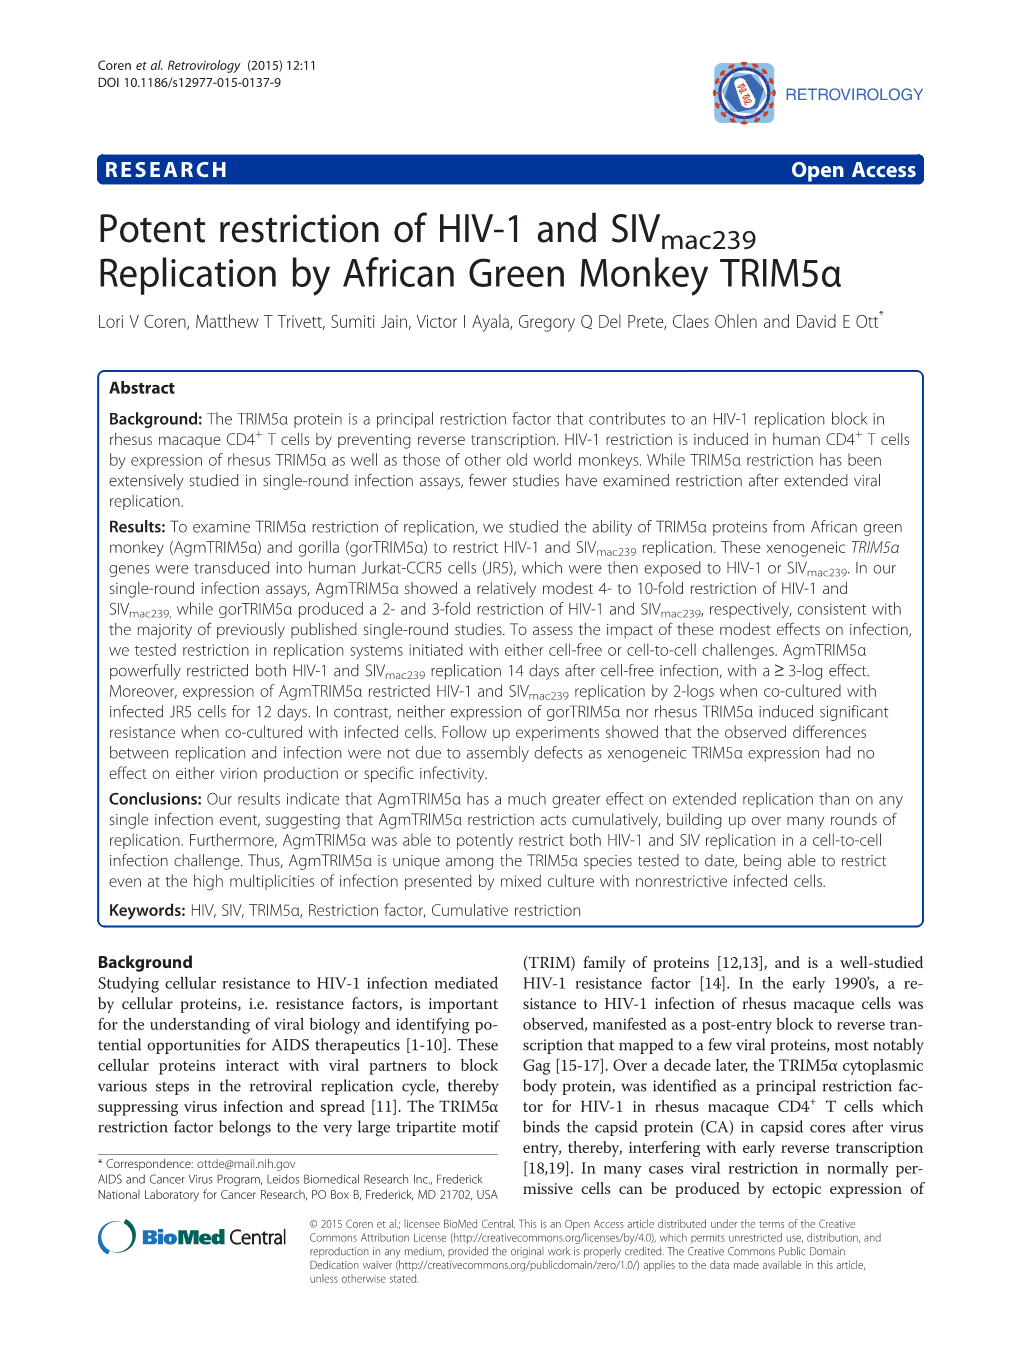 Potent Restriction of HIV-1 and Sivmac239 Replication by African